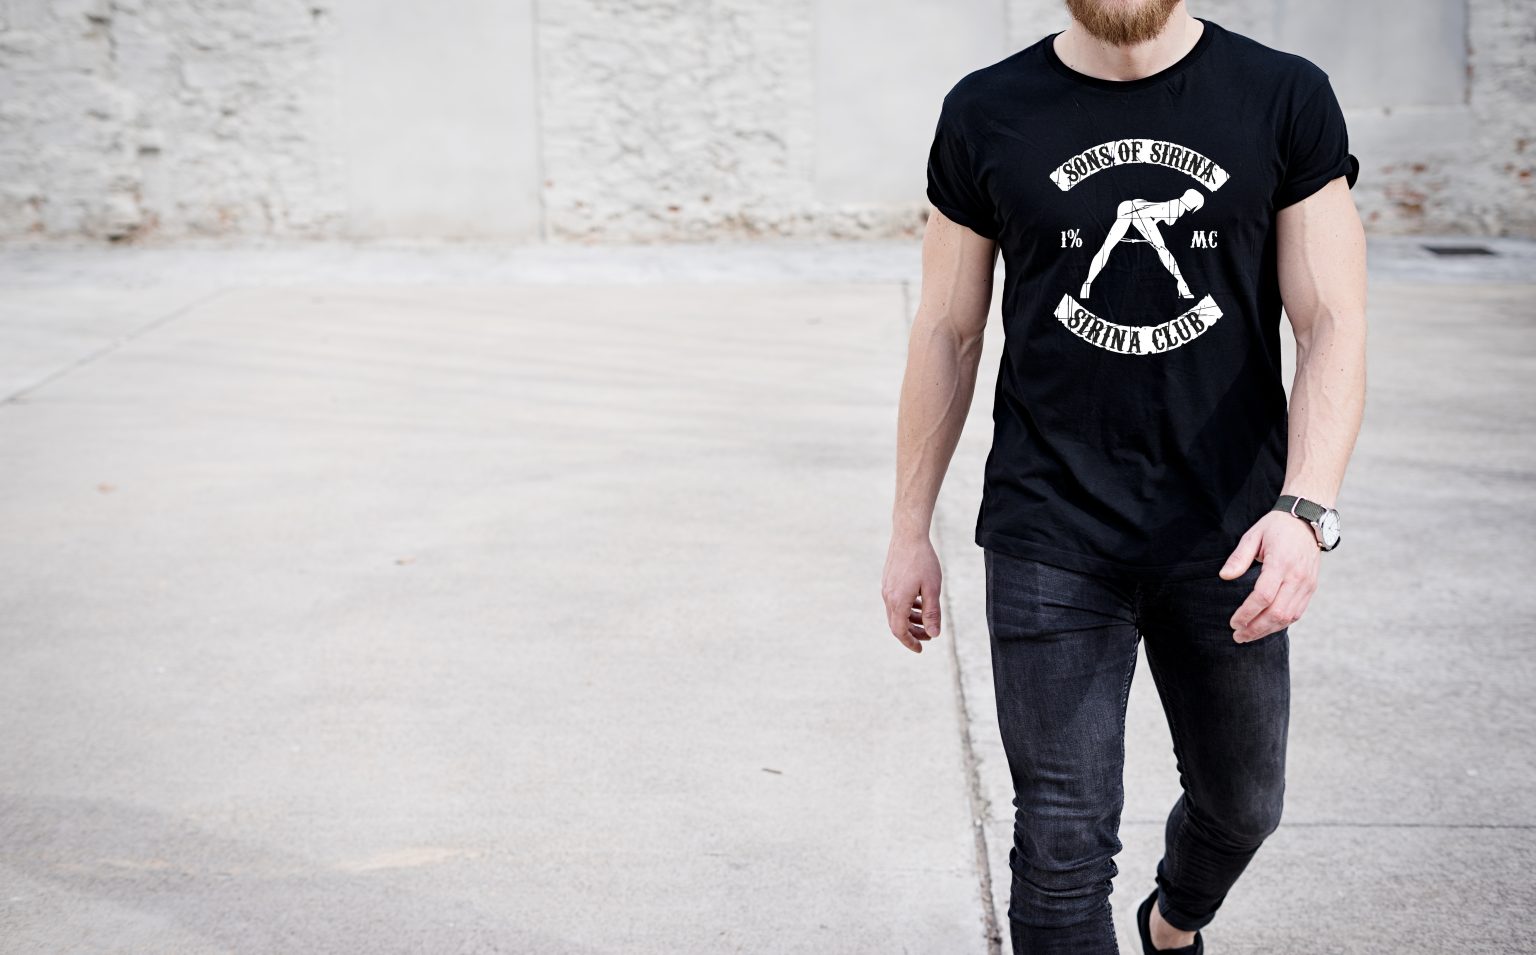 Young,Muscular,Man,Wearing,Black,Tshirt,And,Jeans,Walking,On